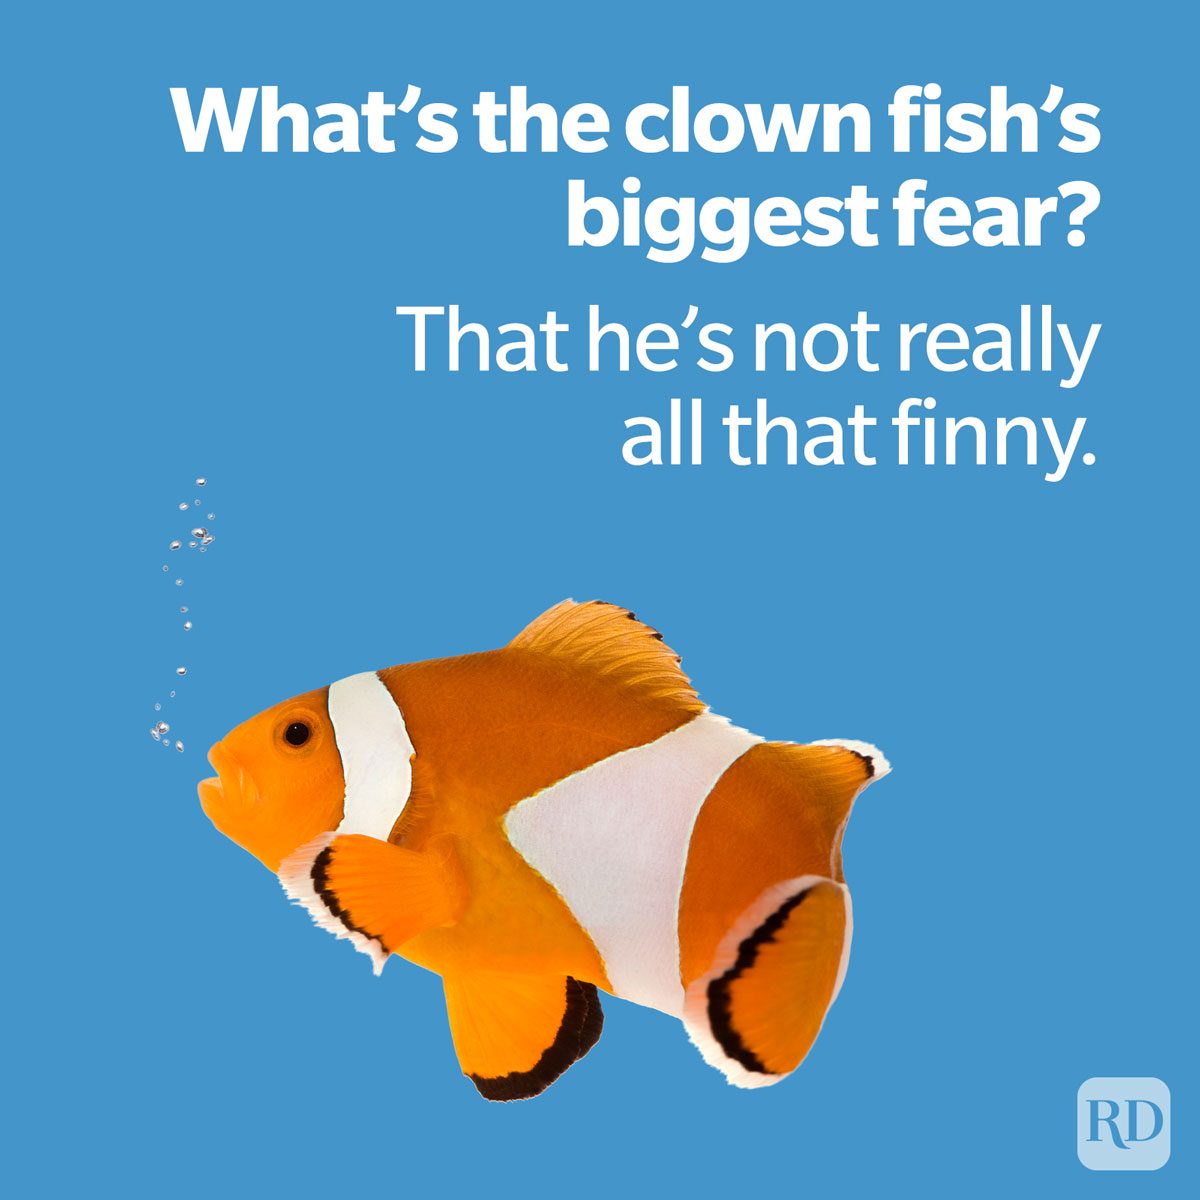 joke about a clown fish fearing not being finny on blue background